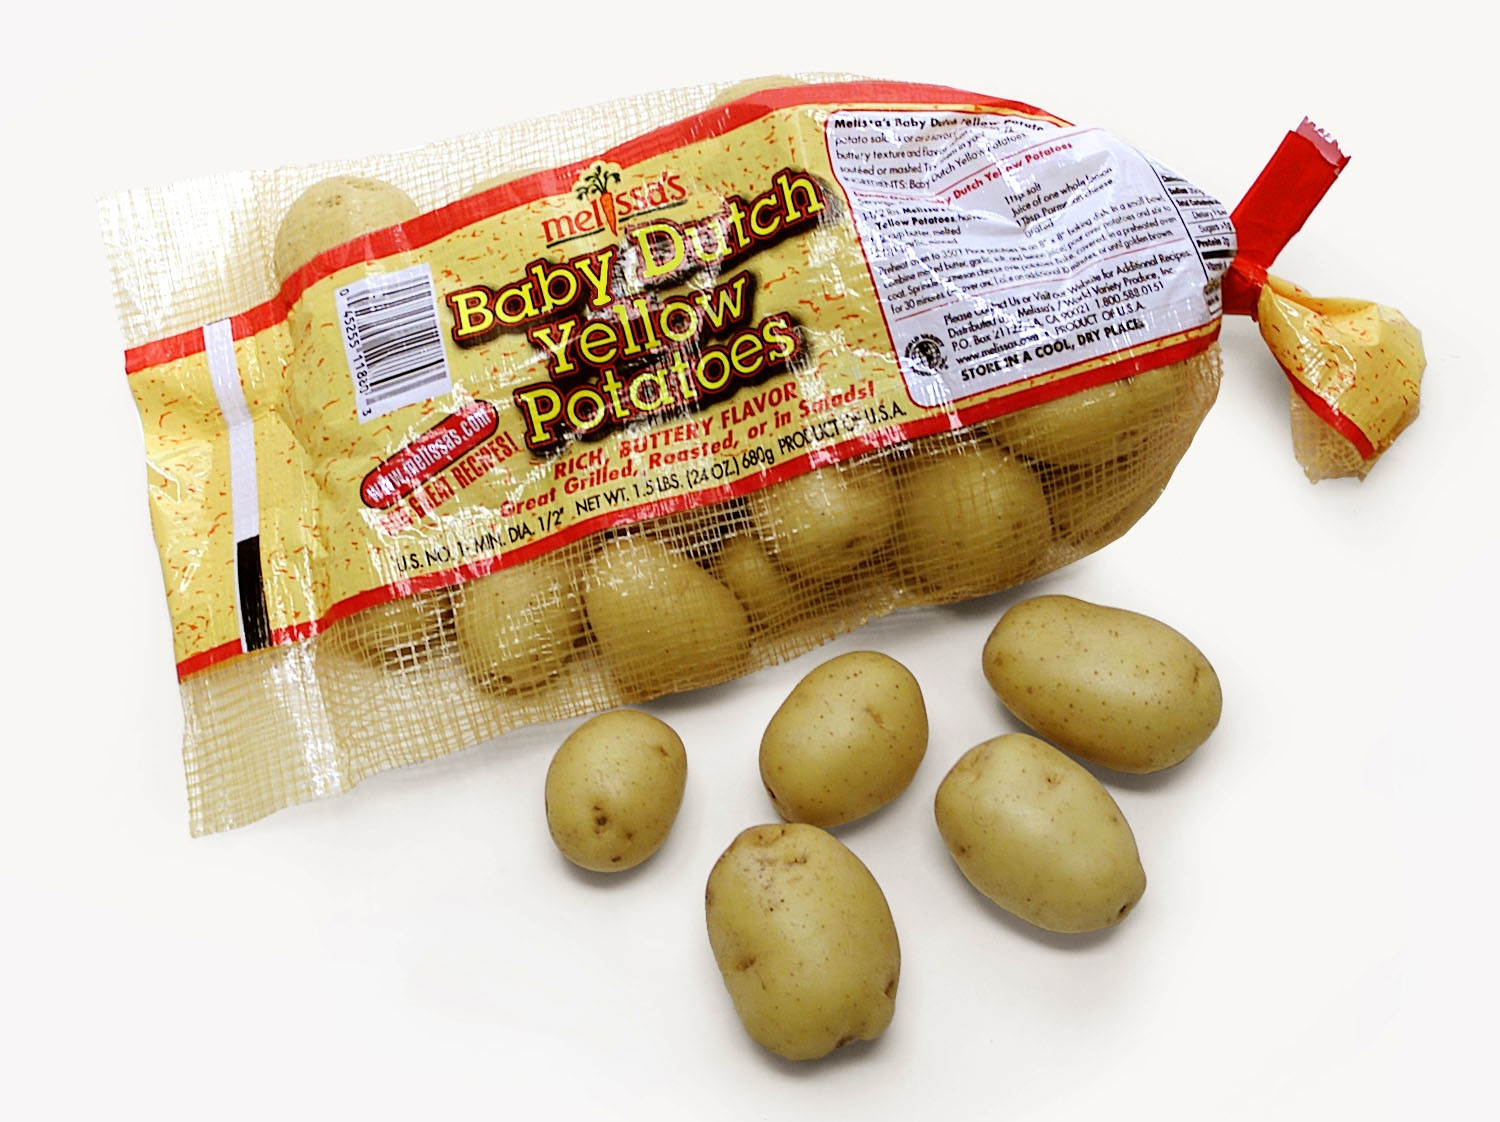 Baby Dutch Yellow Potatoes Recipes
 Food Writer and Food Reviews Recipes for Melissa s Baby